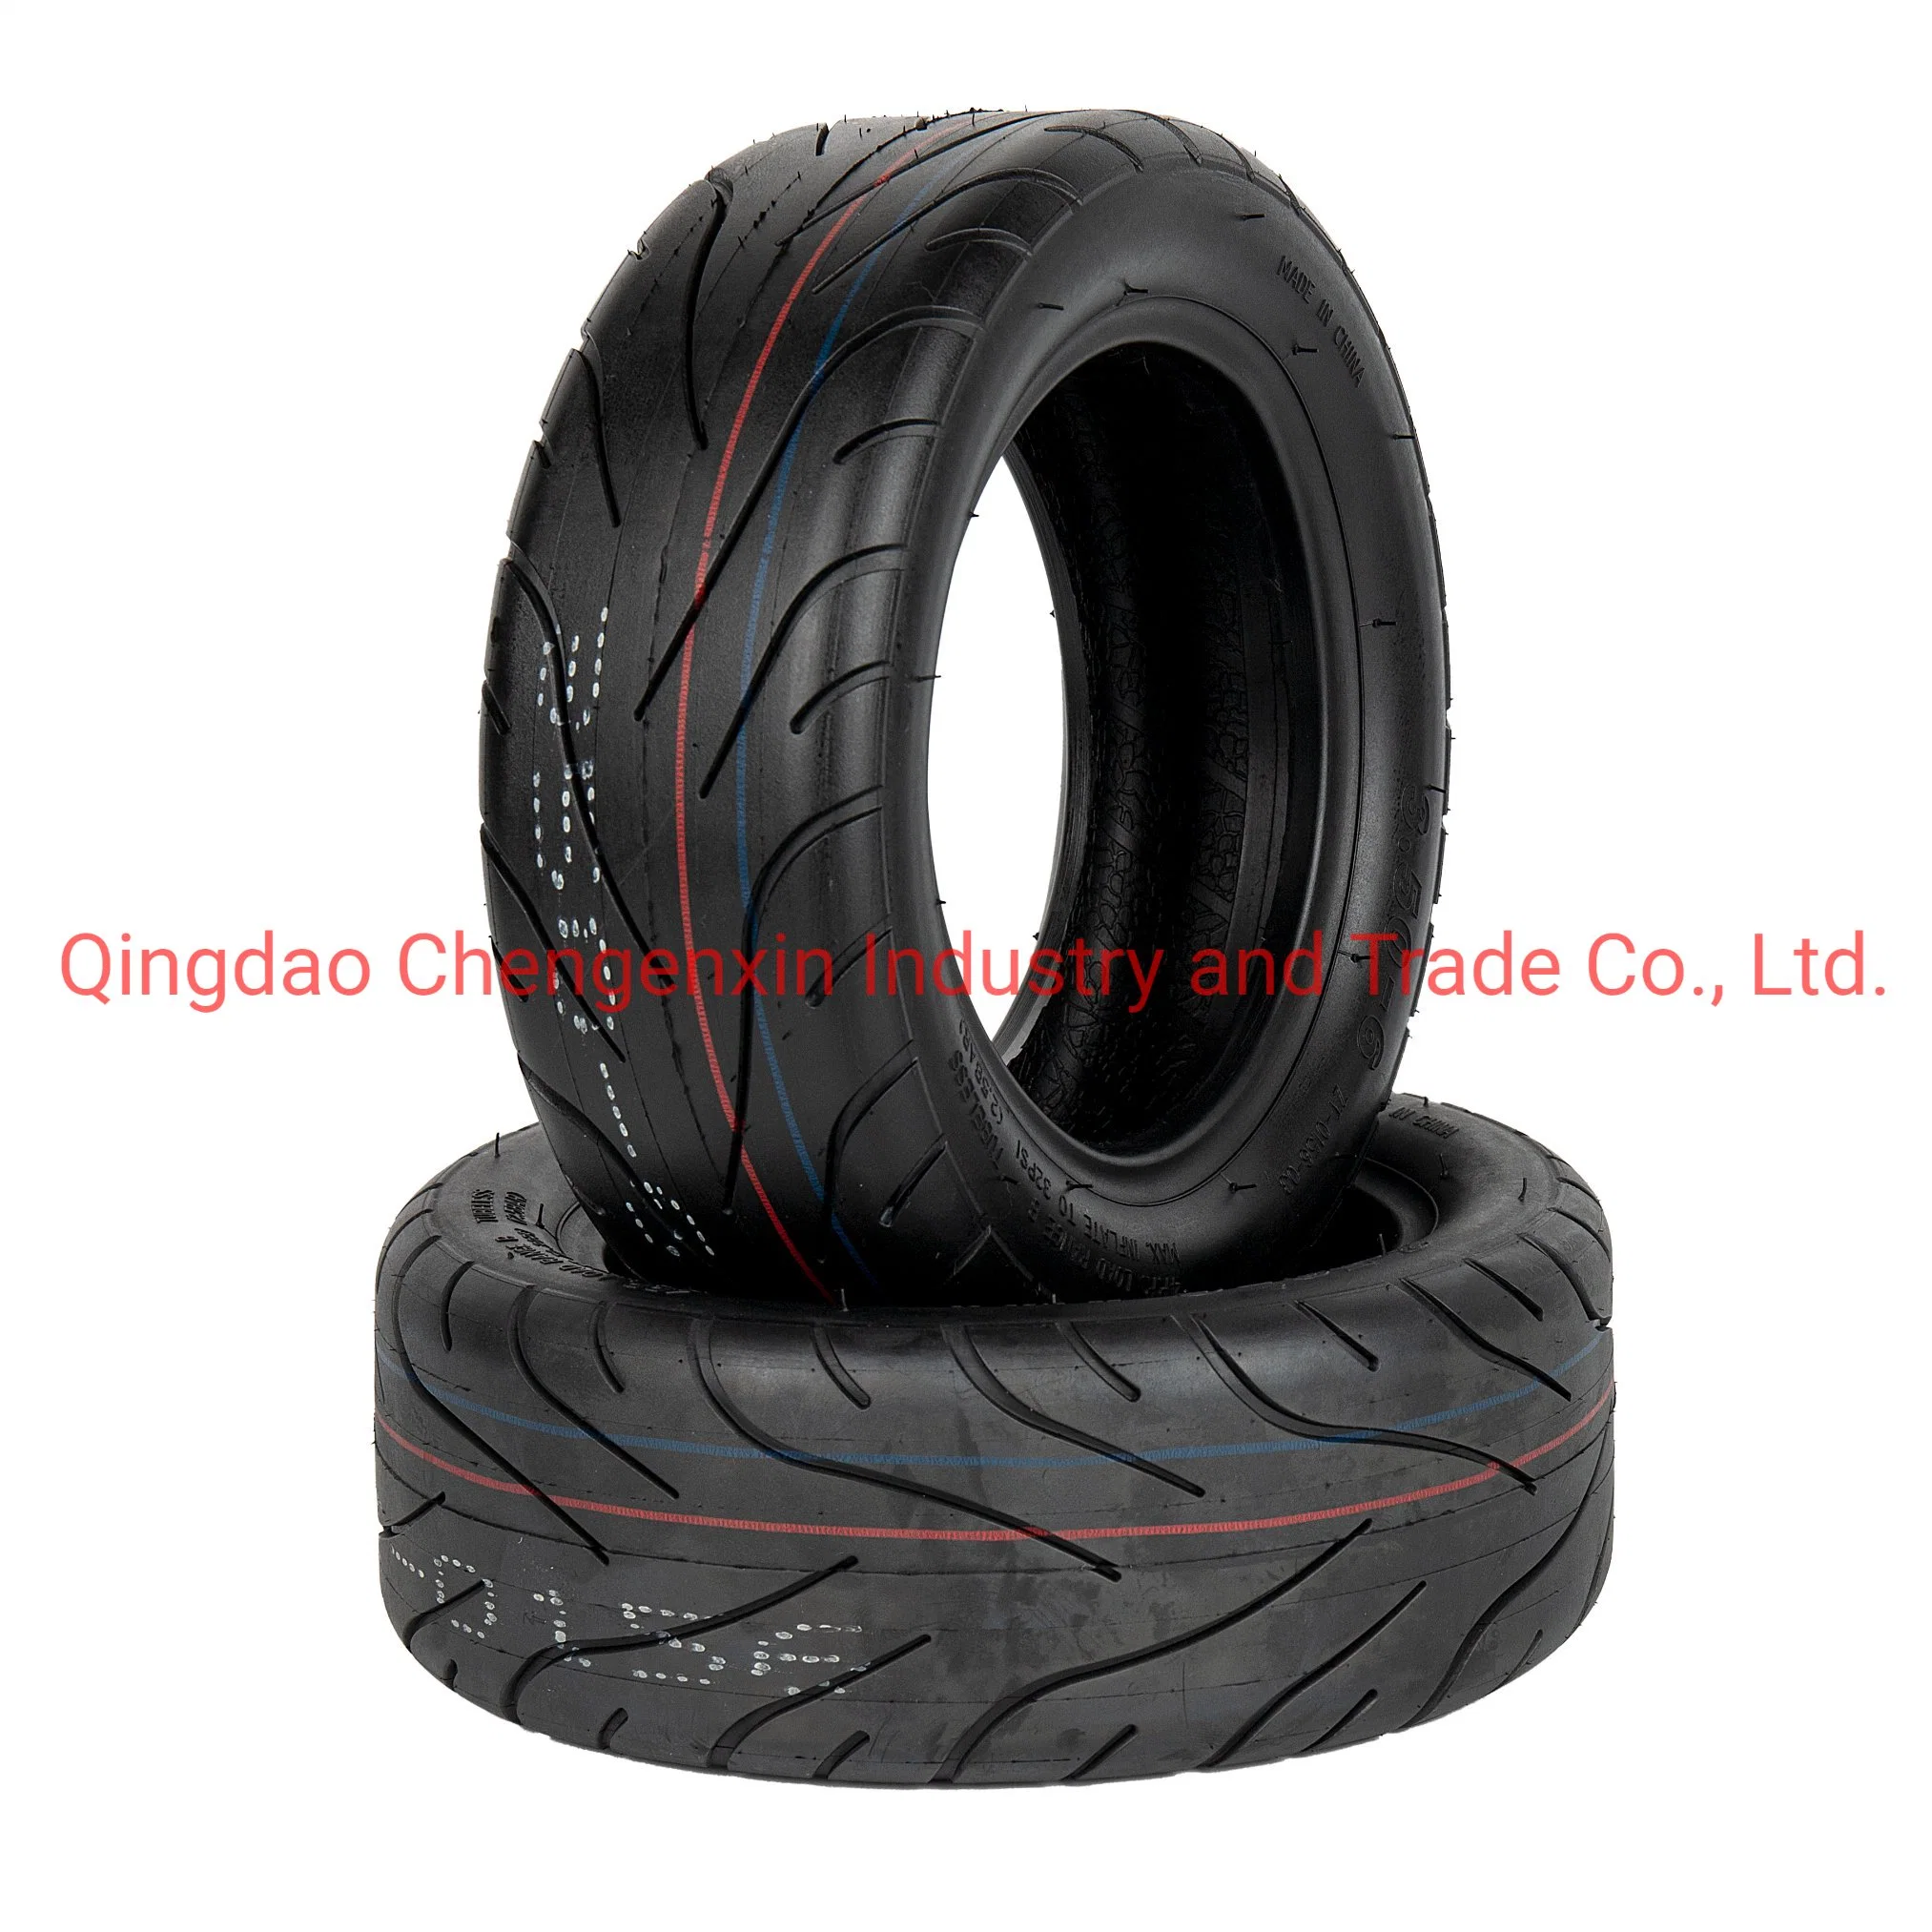 Factory Sales Motorcycle Sapre Parts Accessory Scooter Part Tubeless Tyre Motorcycle Rubber Wheels Tires for Motorbike/Electric Vehicle